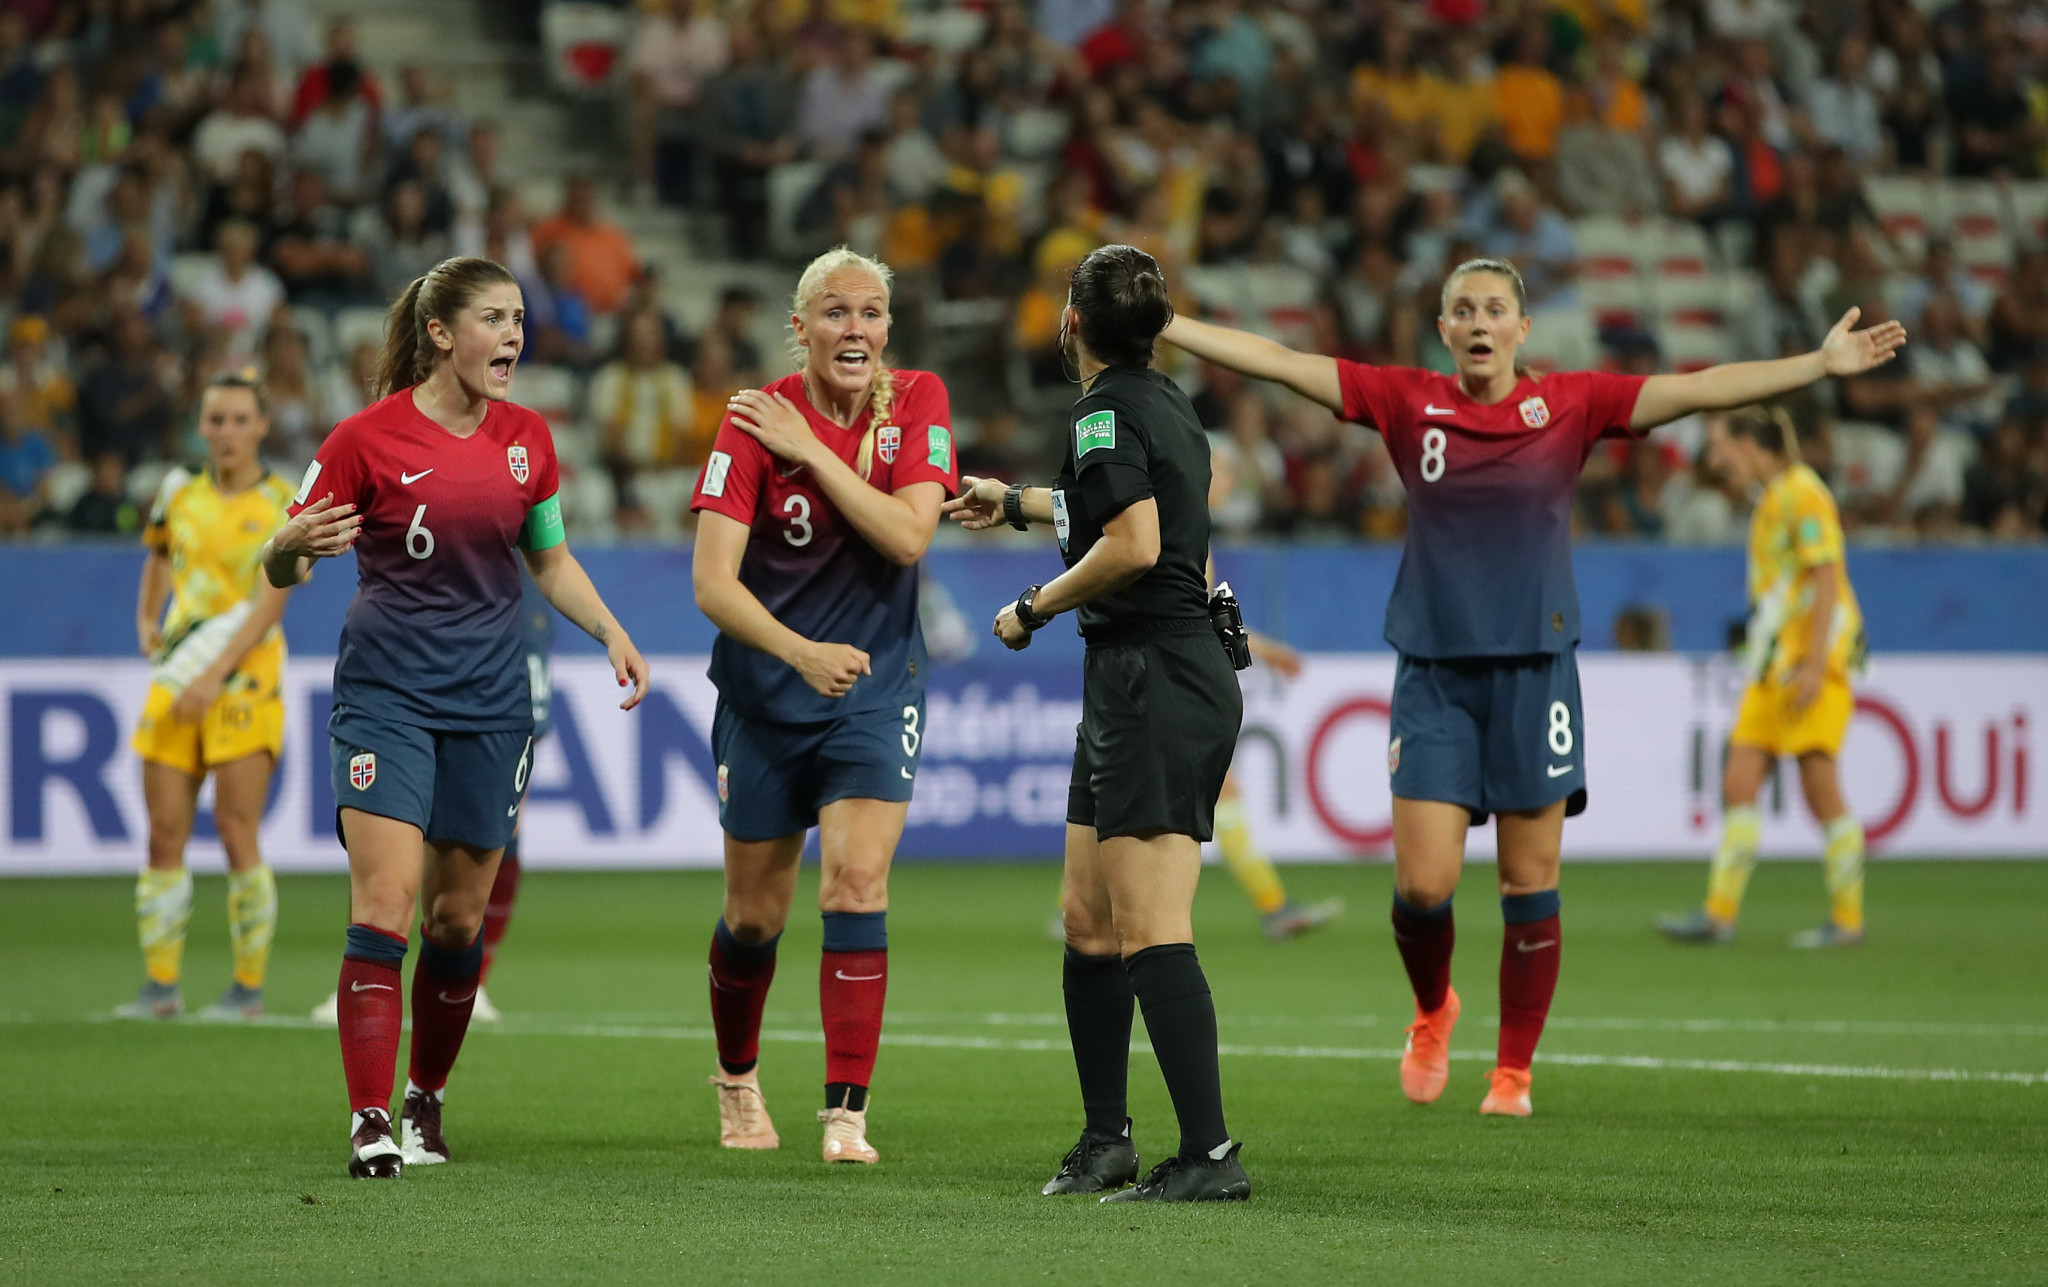 Maria Thorisdóttir complains after the referee gives a penalty against Norway for handball, which was overturned following the intervention of VAR ©Getty Images